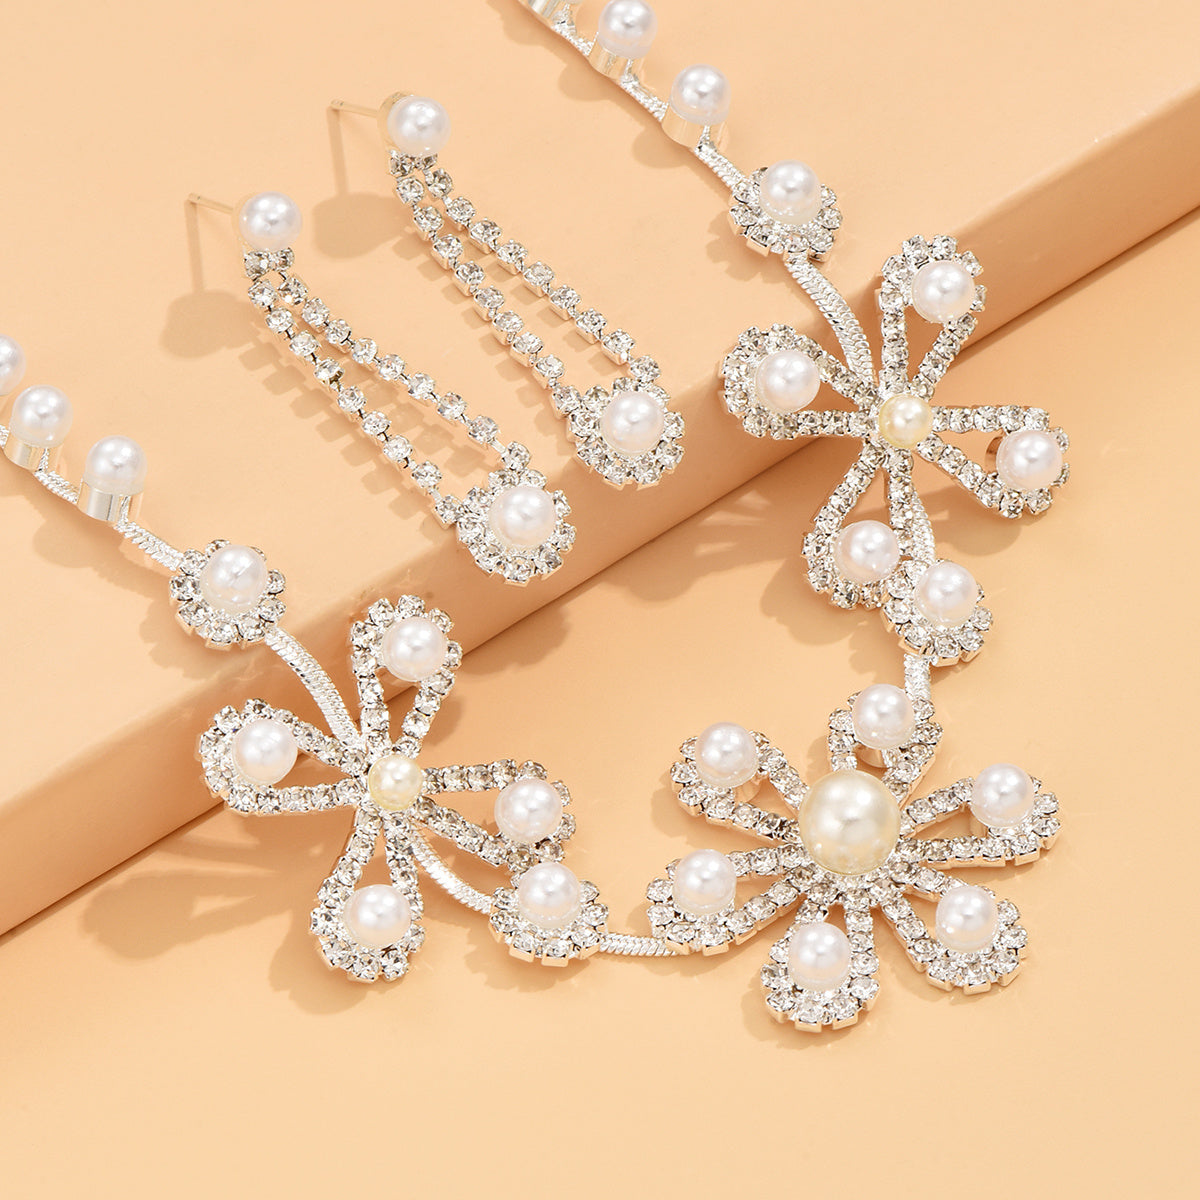 Elegant Flower-Shaped Zircon Jewelry Set with Faux Pearls - Perfect for Weddings and Special Occasions